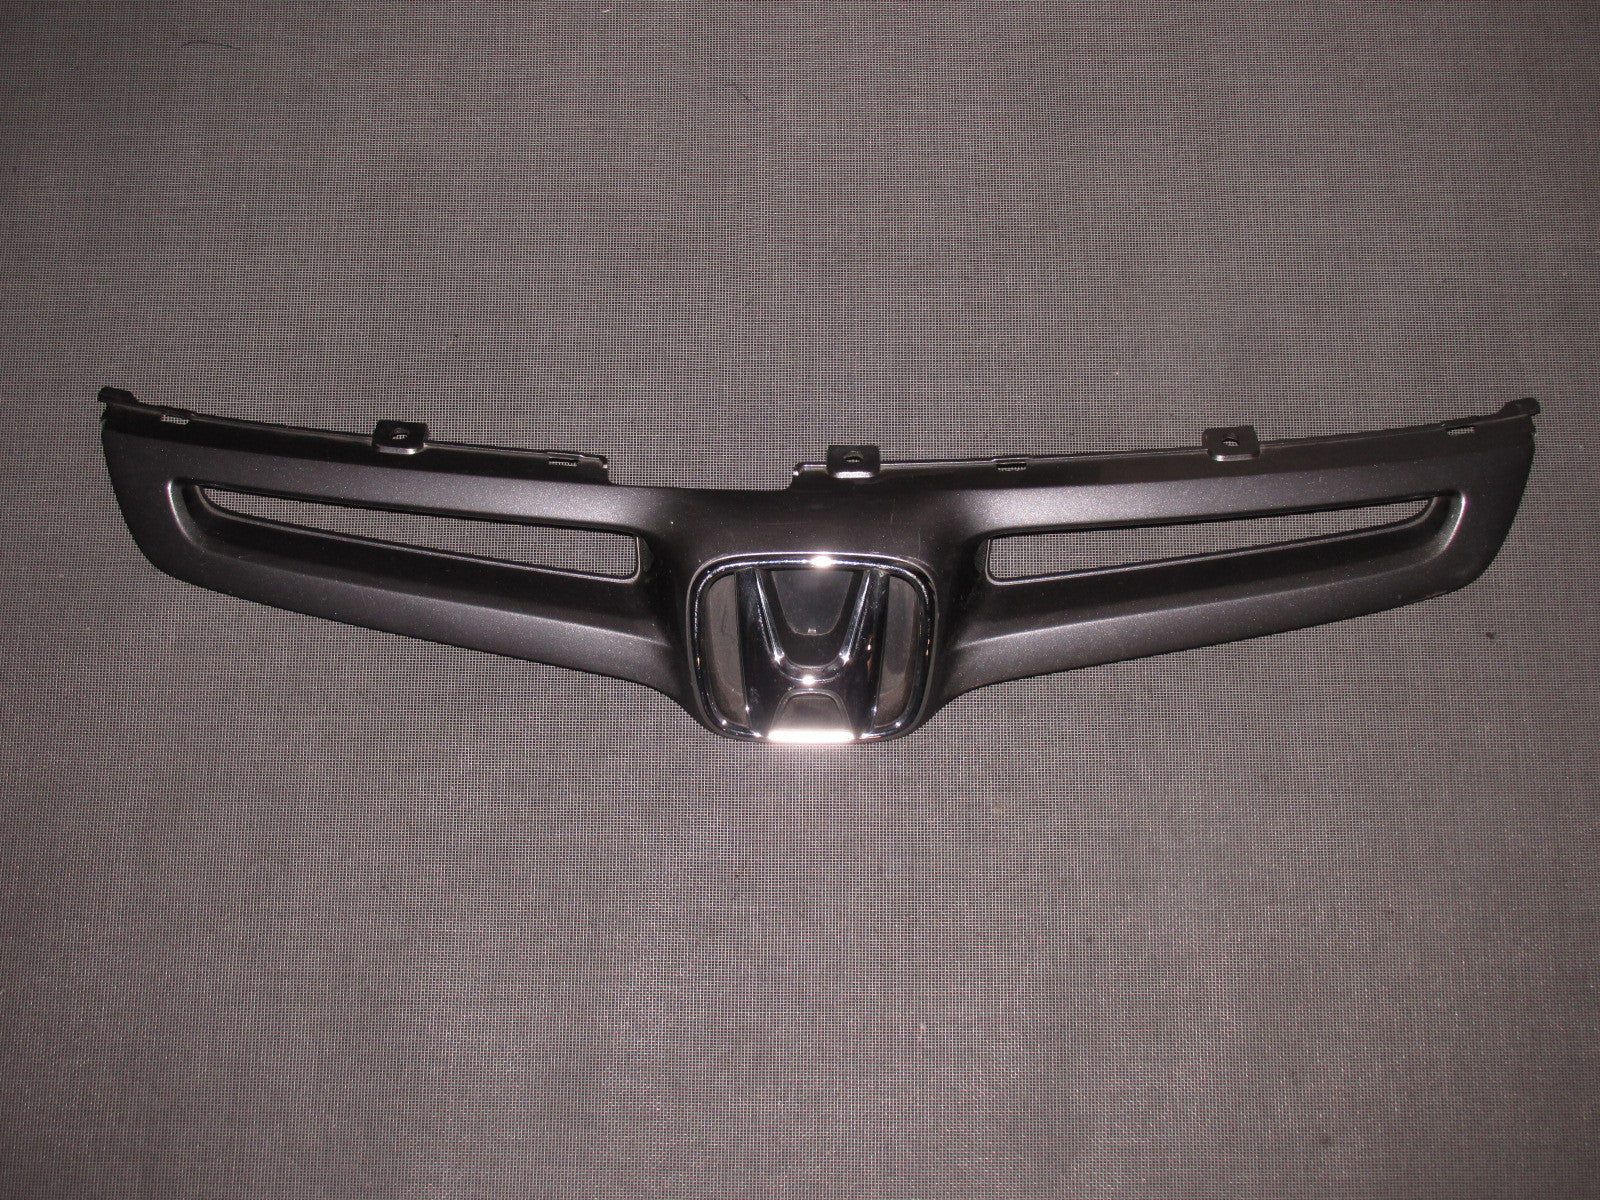 03 04 05 Honda Accord OEM Front Bumper Grille